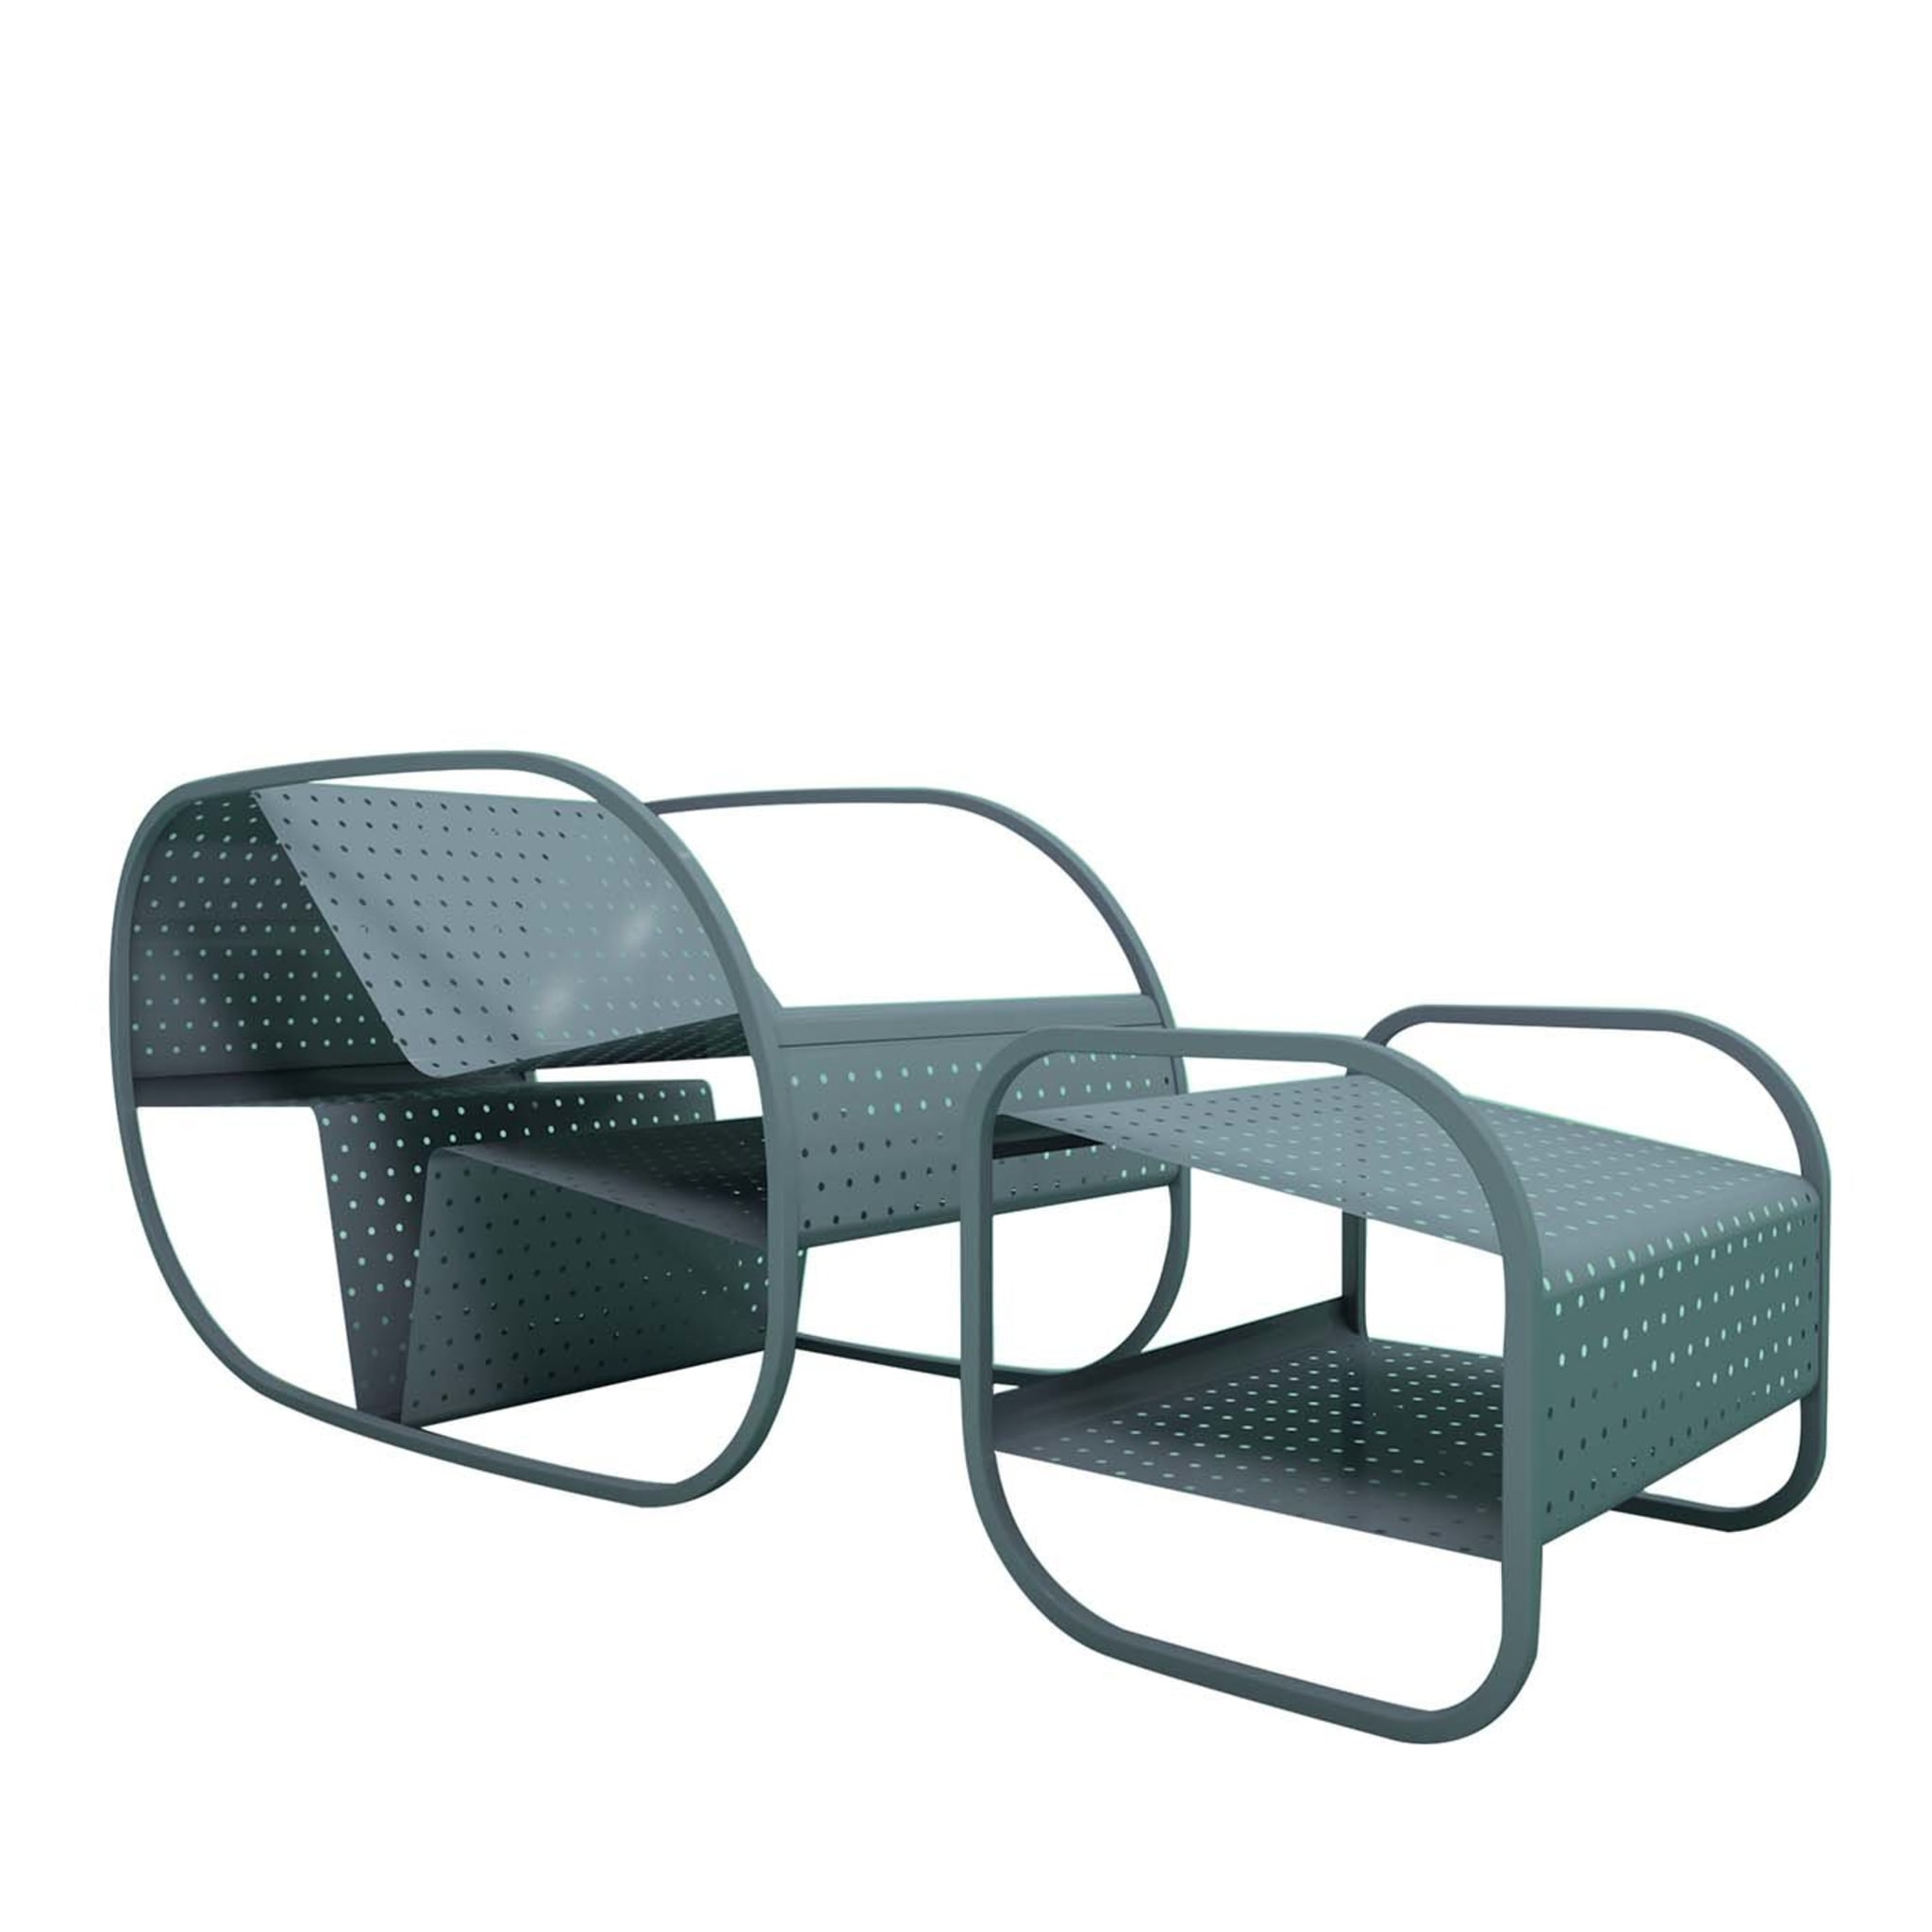 Flip Gray Seat and Sidetable by Salomé Hazan - Main view